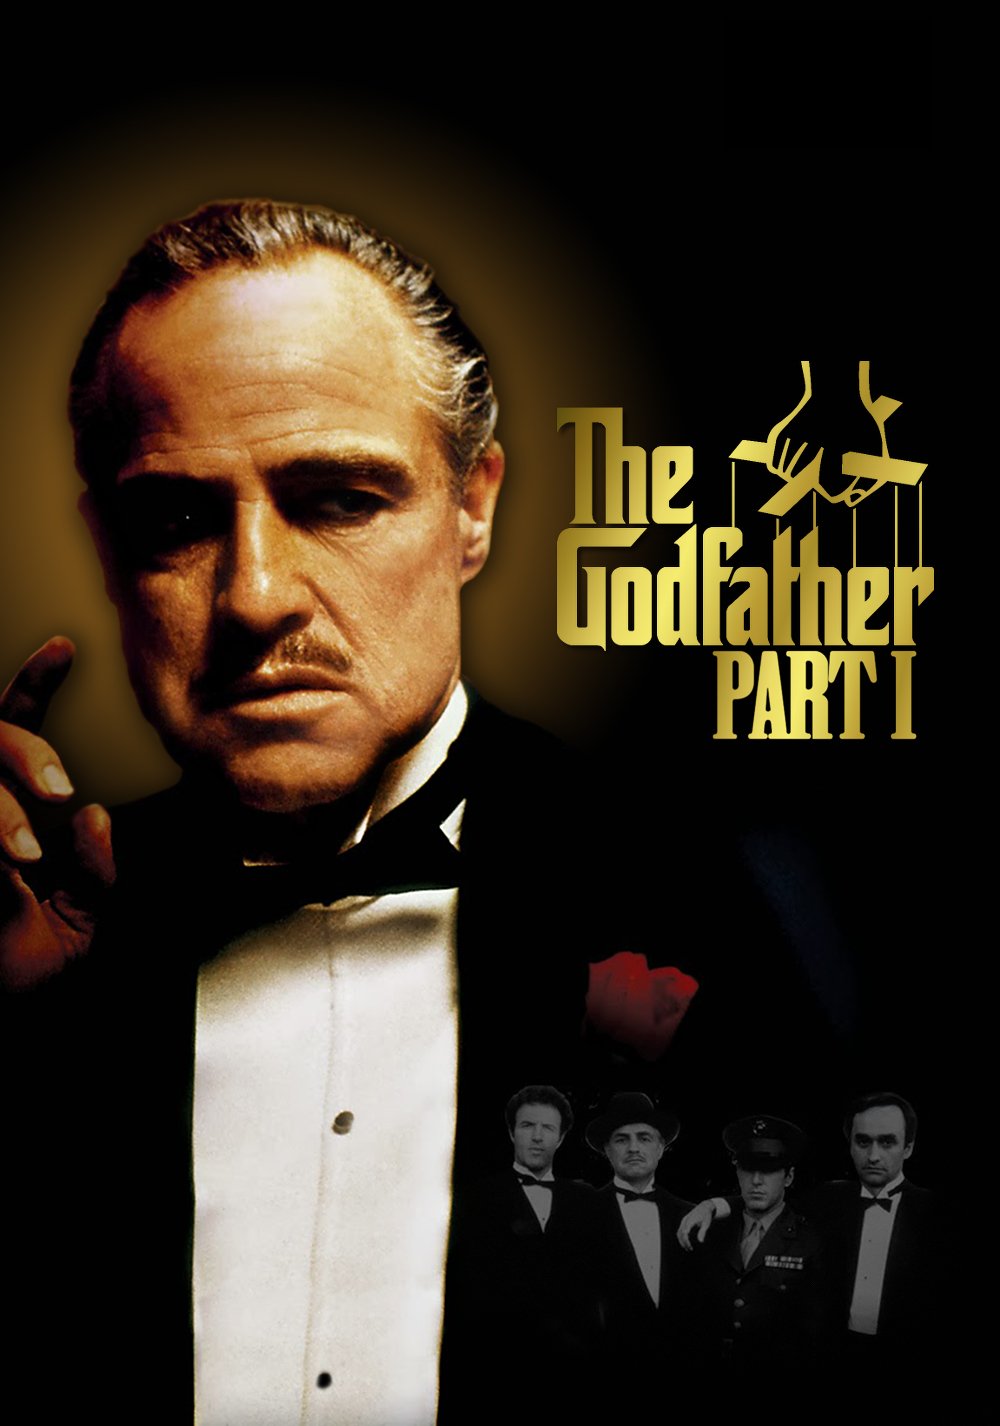 The Thing The Godfather Poster The Godfather Movie Posters - Vrogue